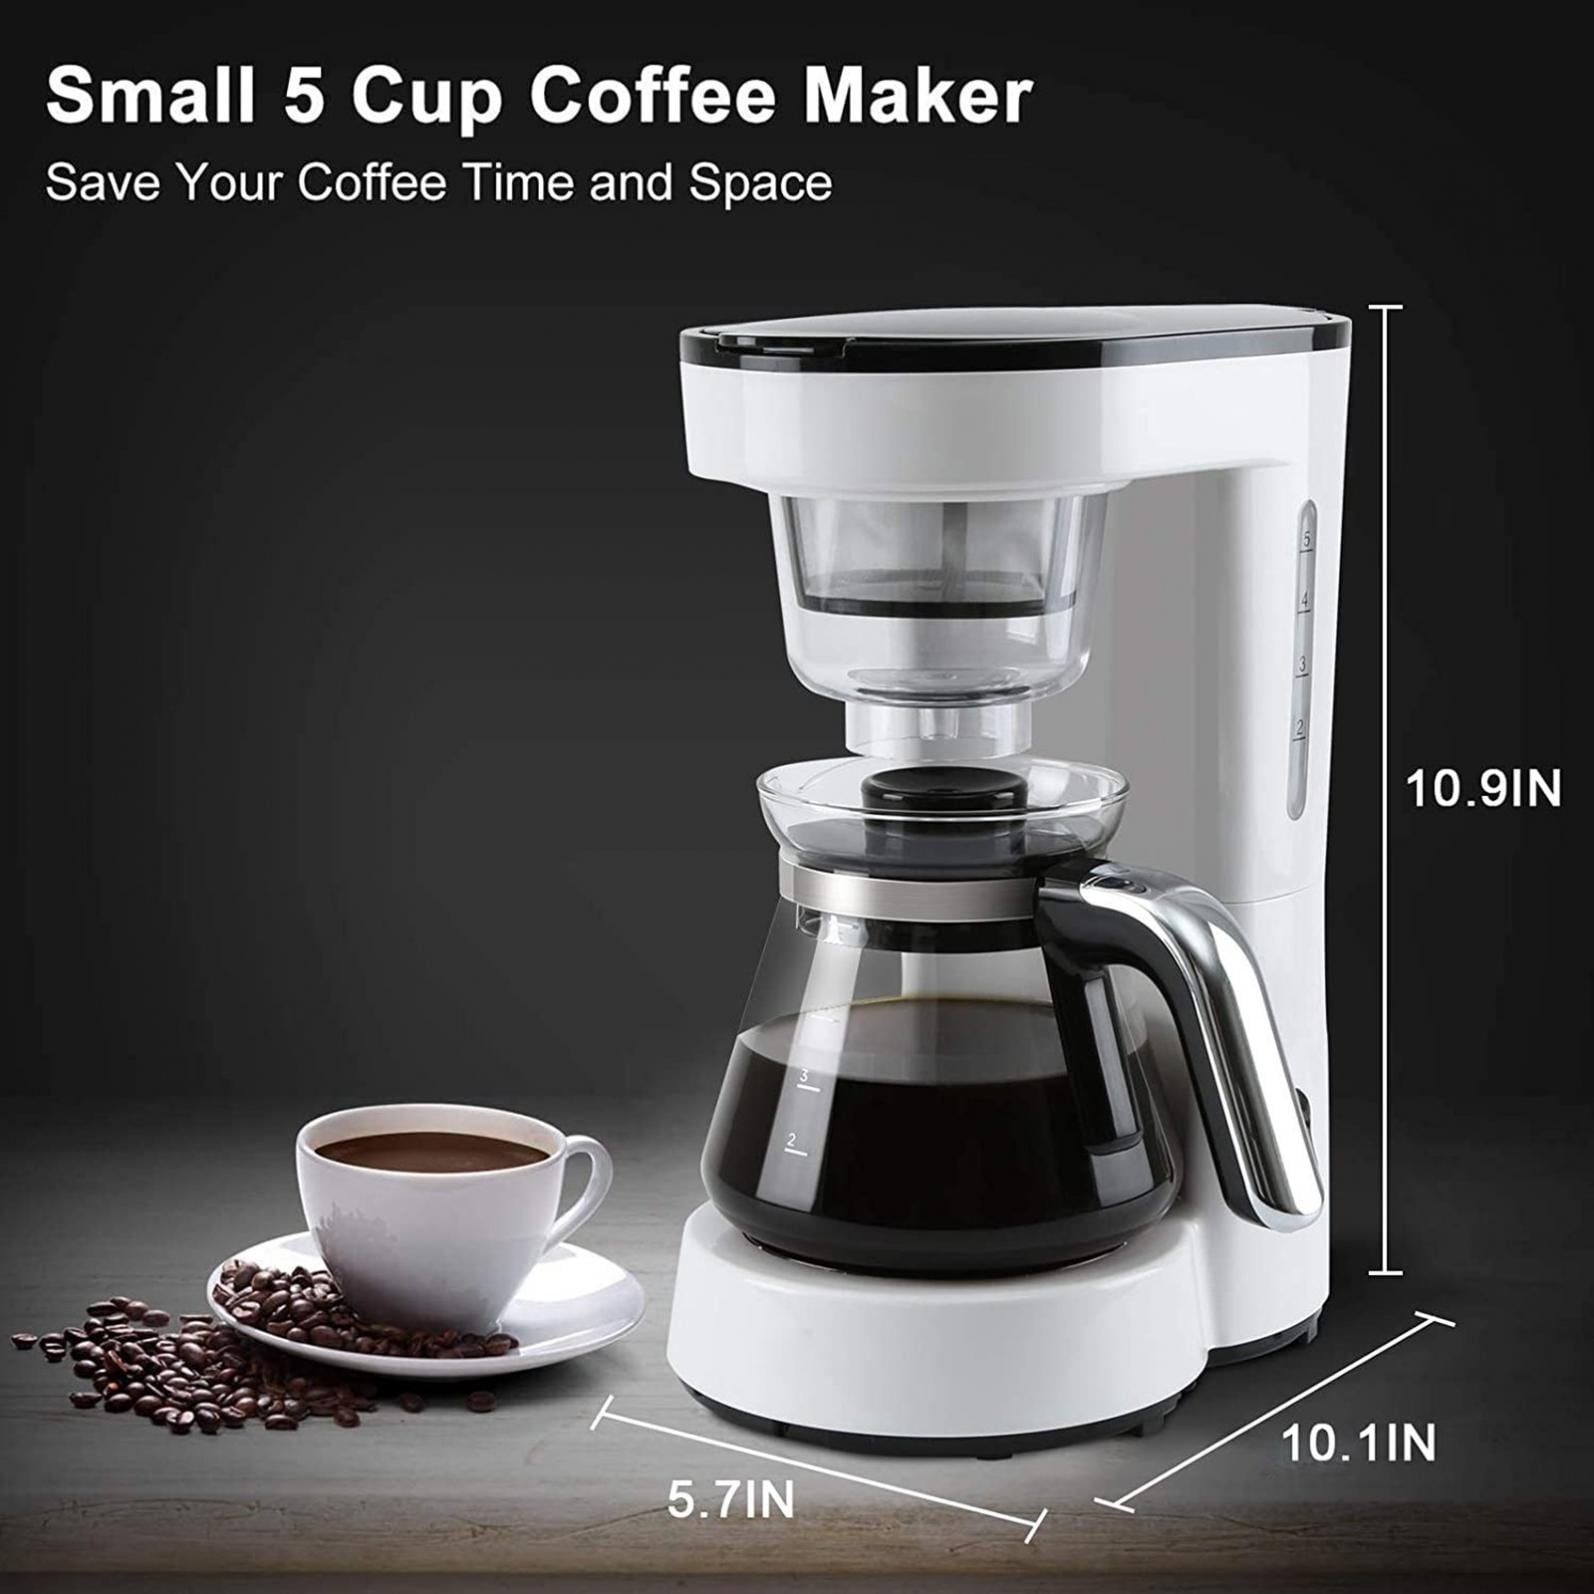 https://ak1.ostkcdn.com/images/products/is/images/direct/fe2679d6bc759907add1c7518775262bec5bbb30/5-Cups-Small-Drip-Coffee-Maker-with-Reusable-Filter-Coffee-Pot.jpg